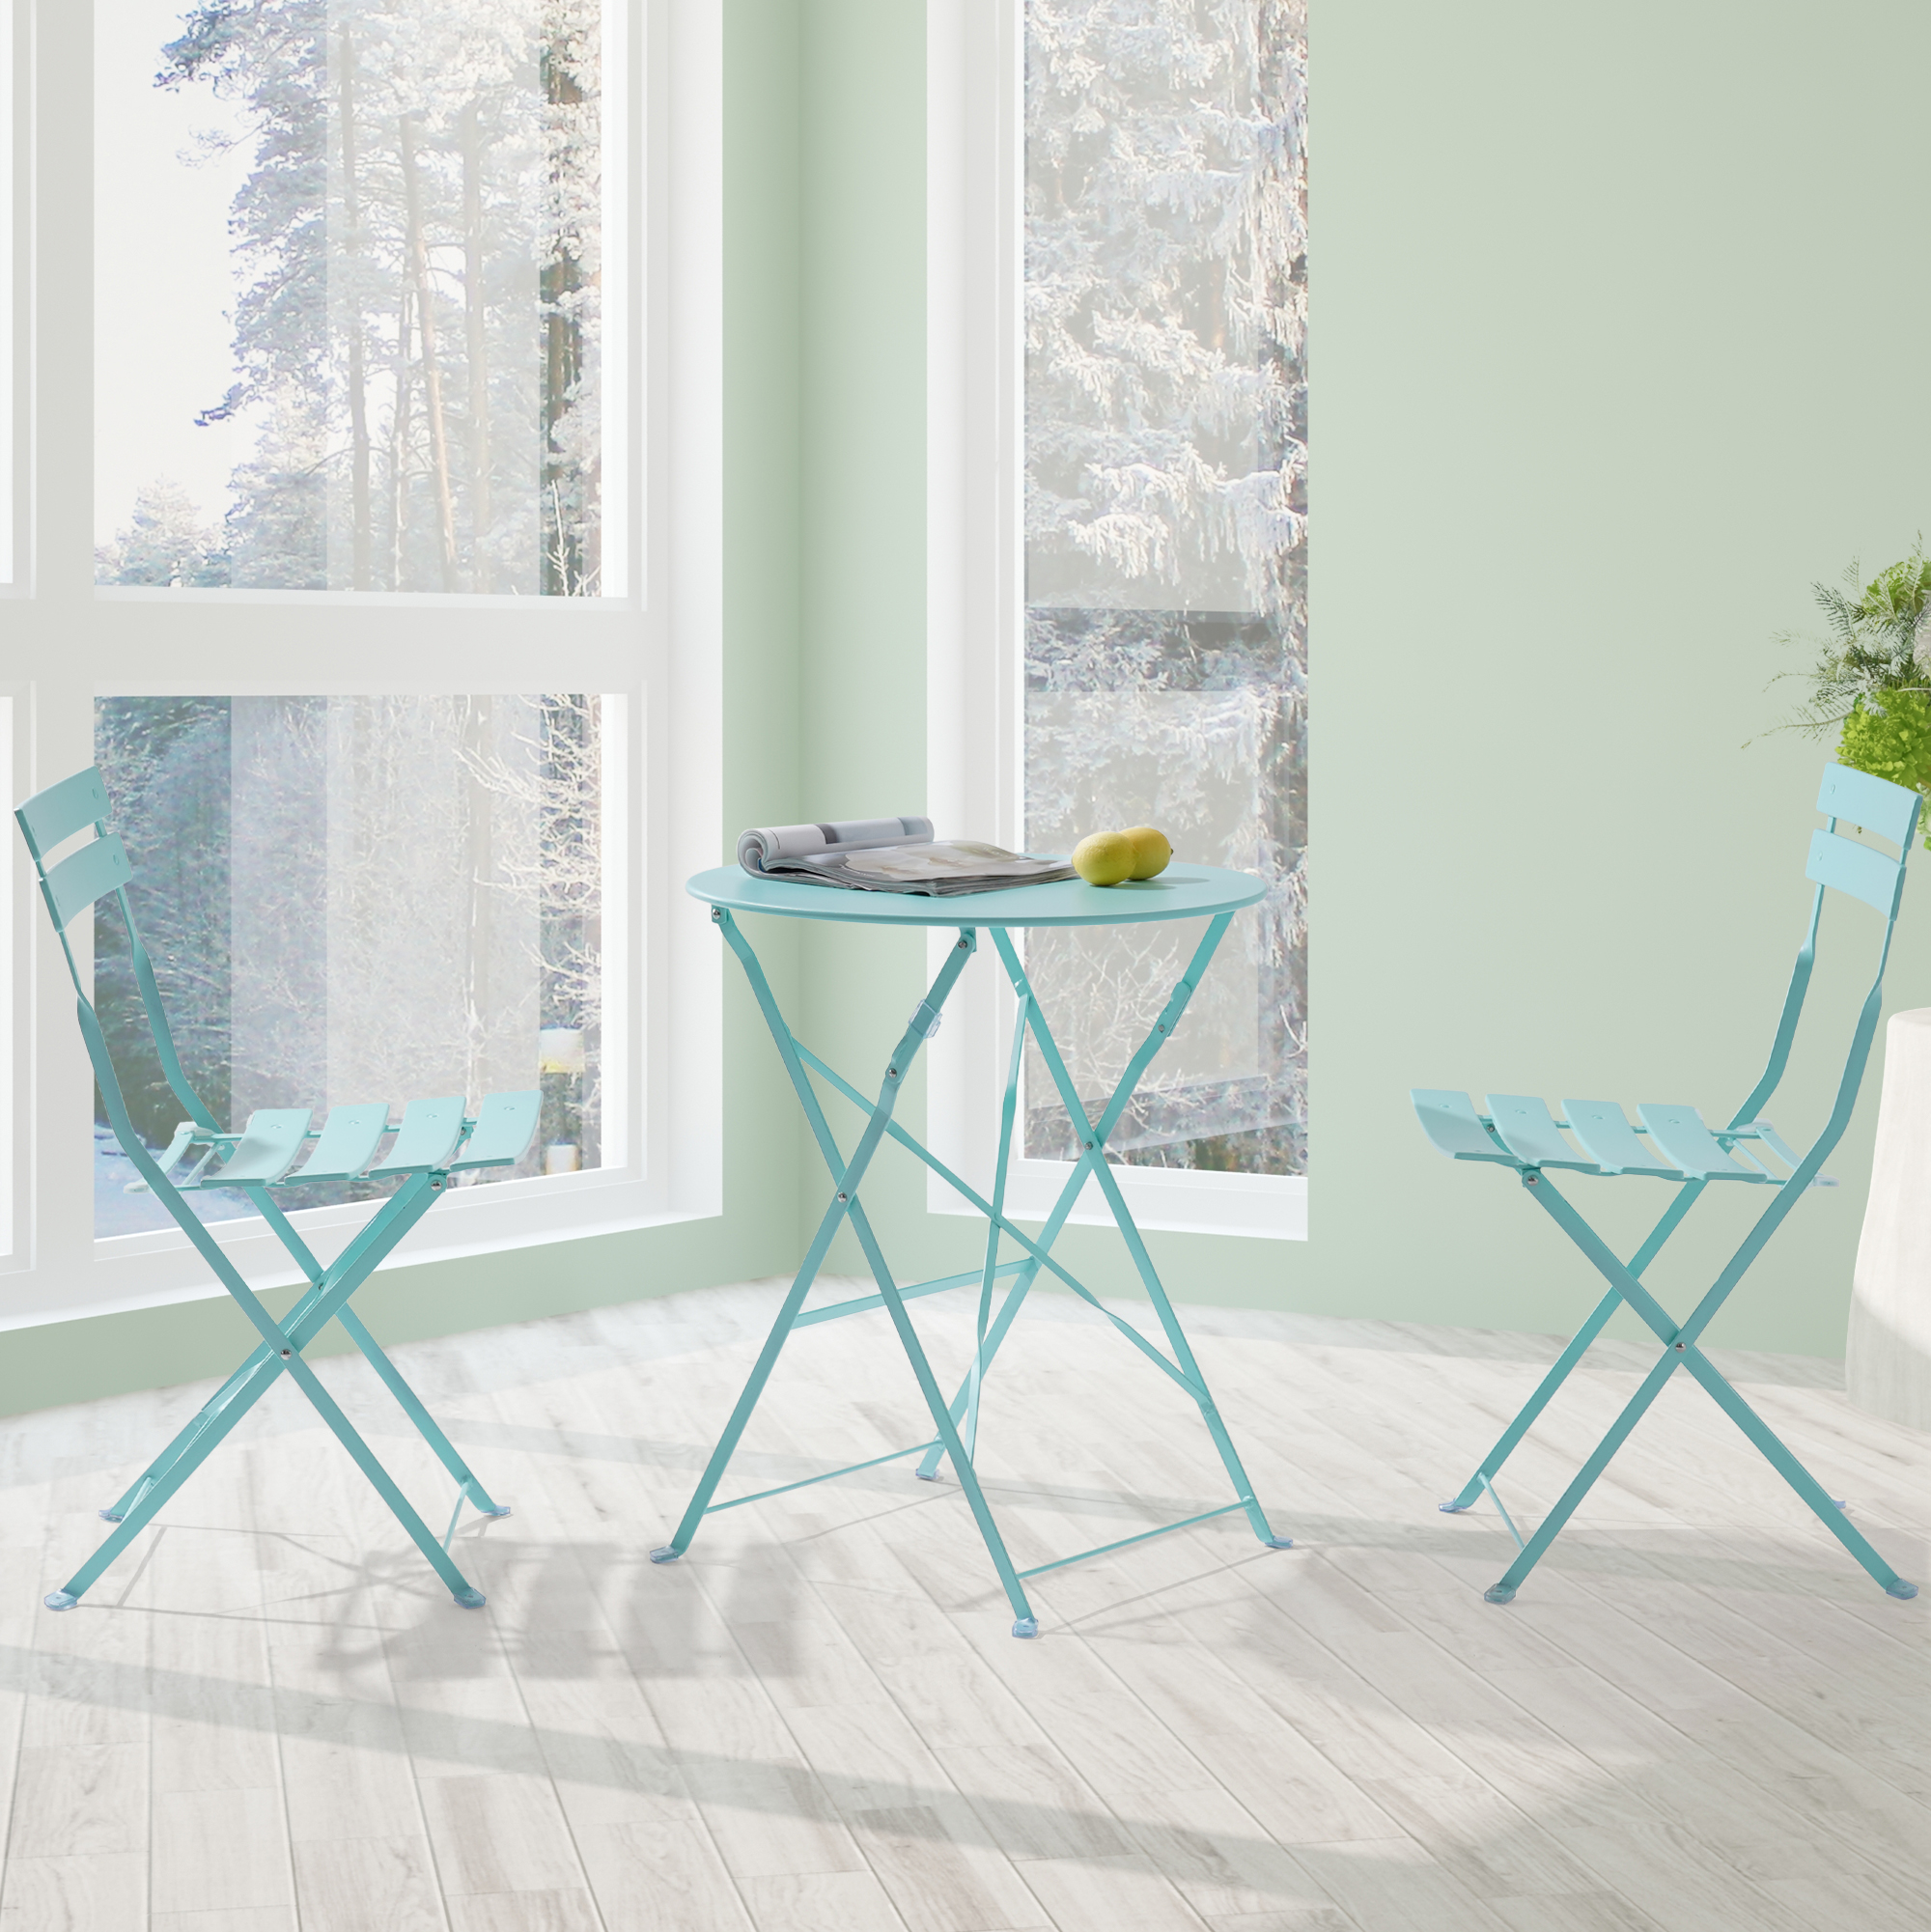 ACEGOSES 3 Pces Patio Folding Chairs with a Steel Frame Table for Garden, Deck and Yards, Misty green - image 1 of 7